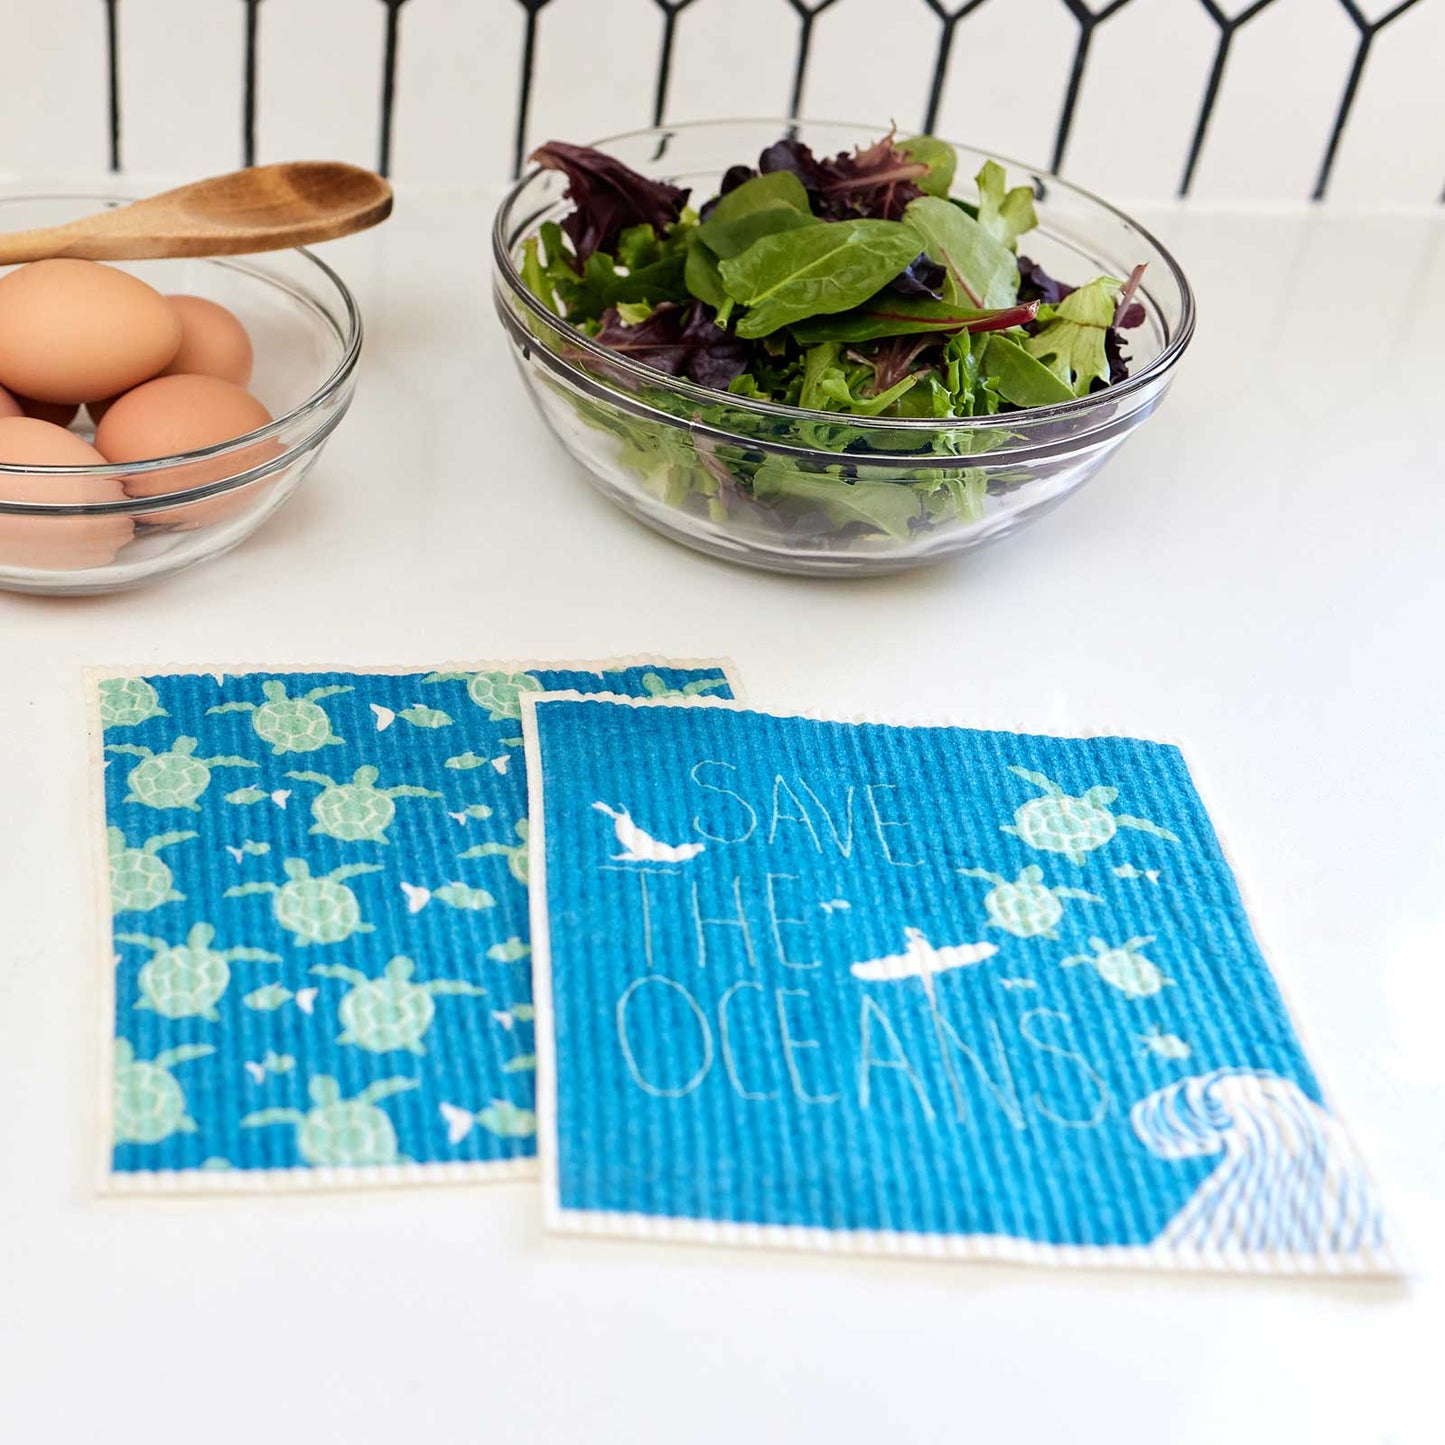 SAVE THE OCEANS Reusable Dishcloth, Set of 2